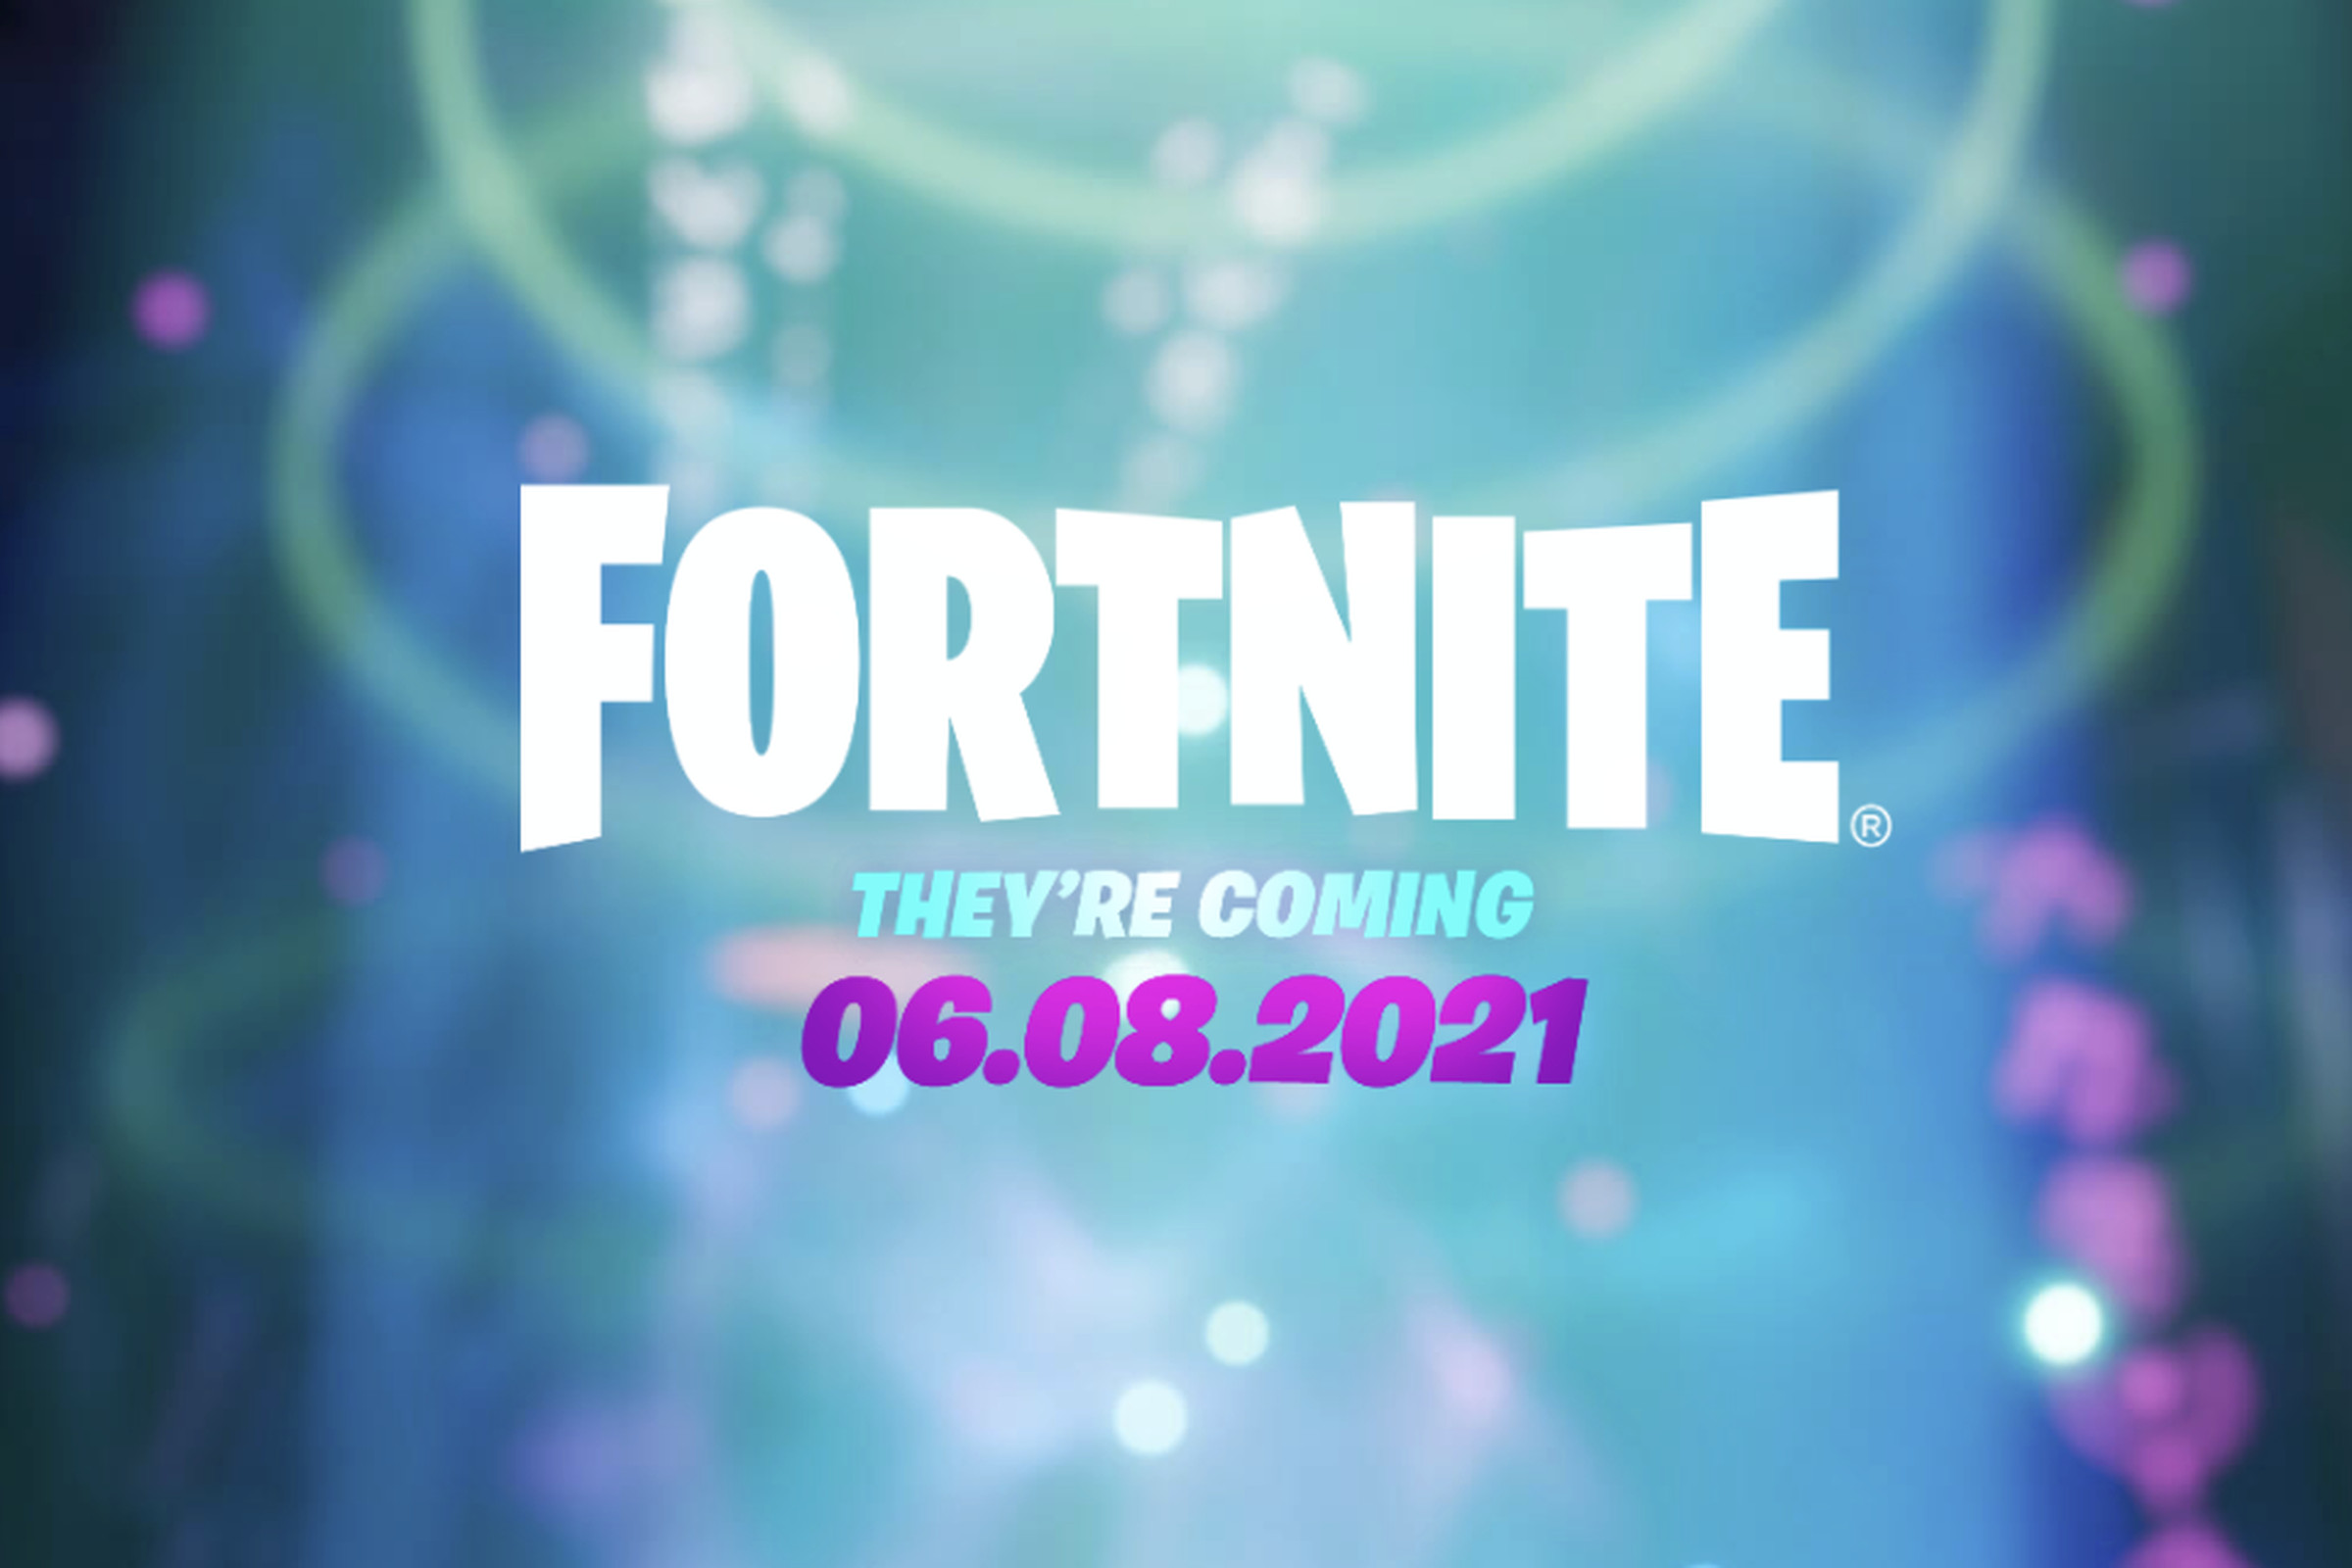 A promotional image for Fortnite’s next season.